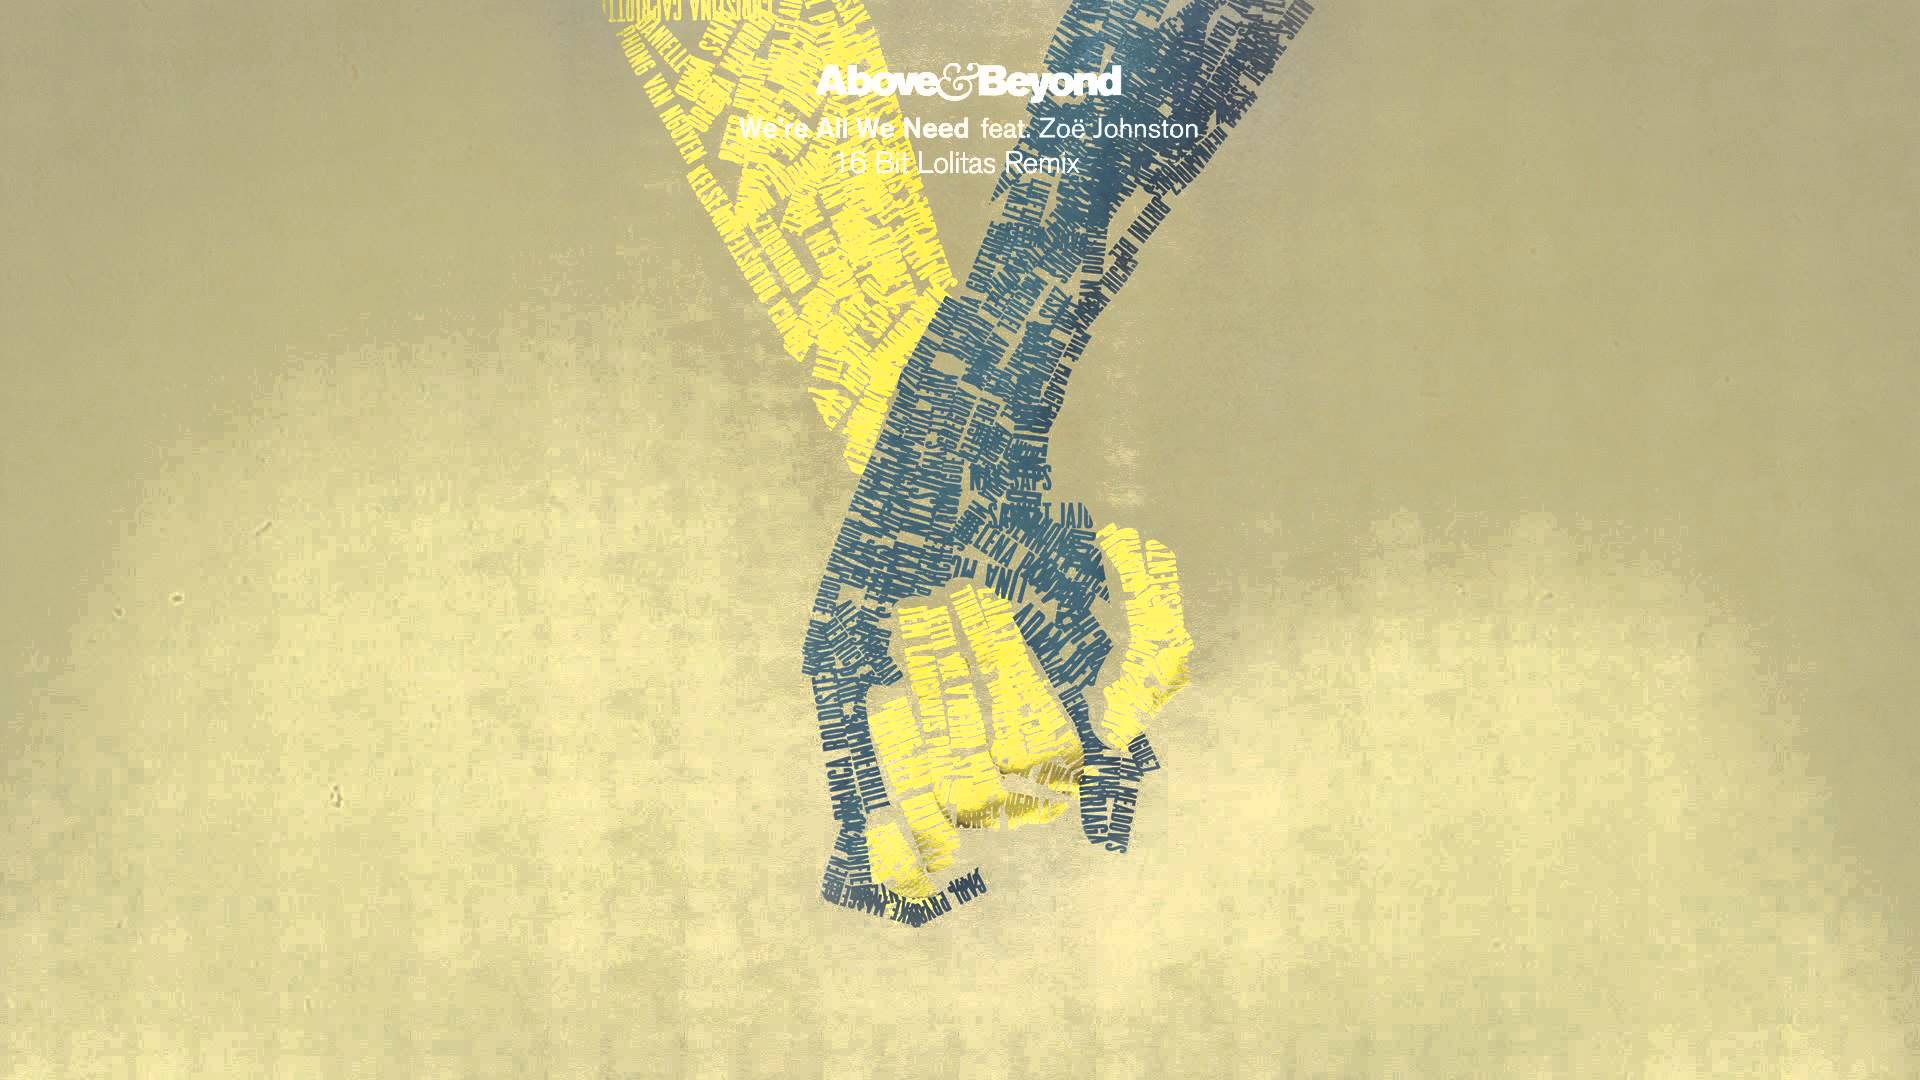 Above & Beyond Wallpapers